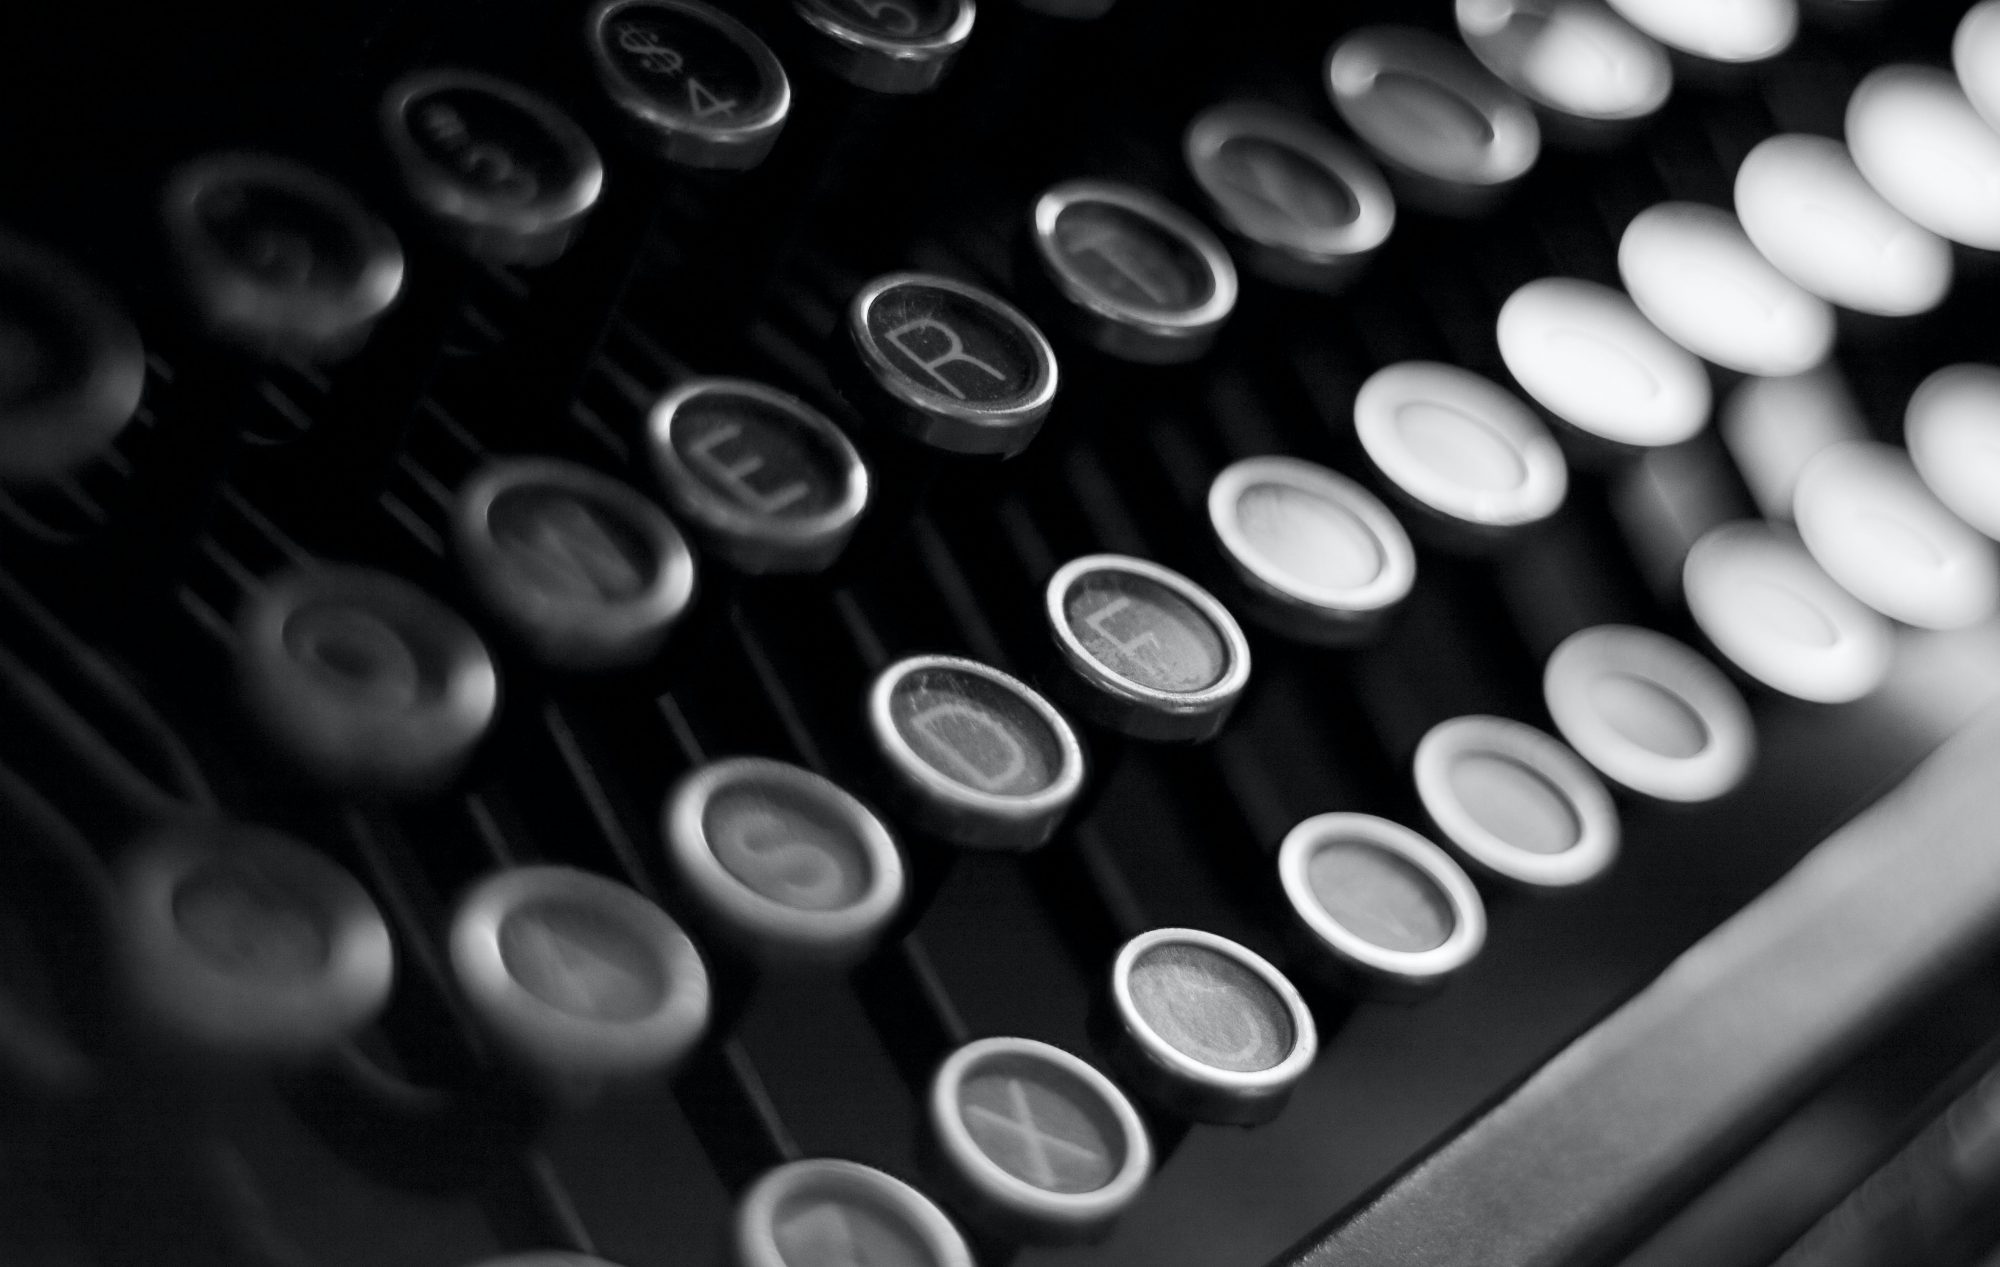 close up of the keys on a typewriter